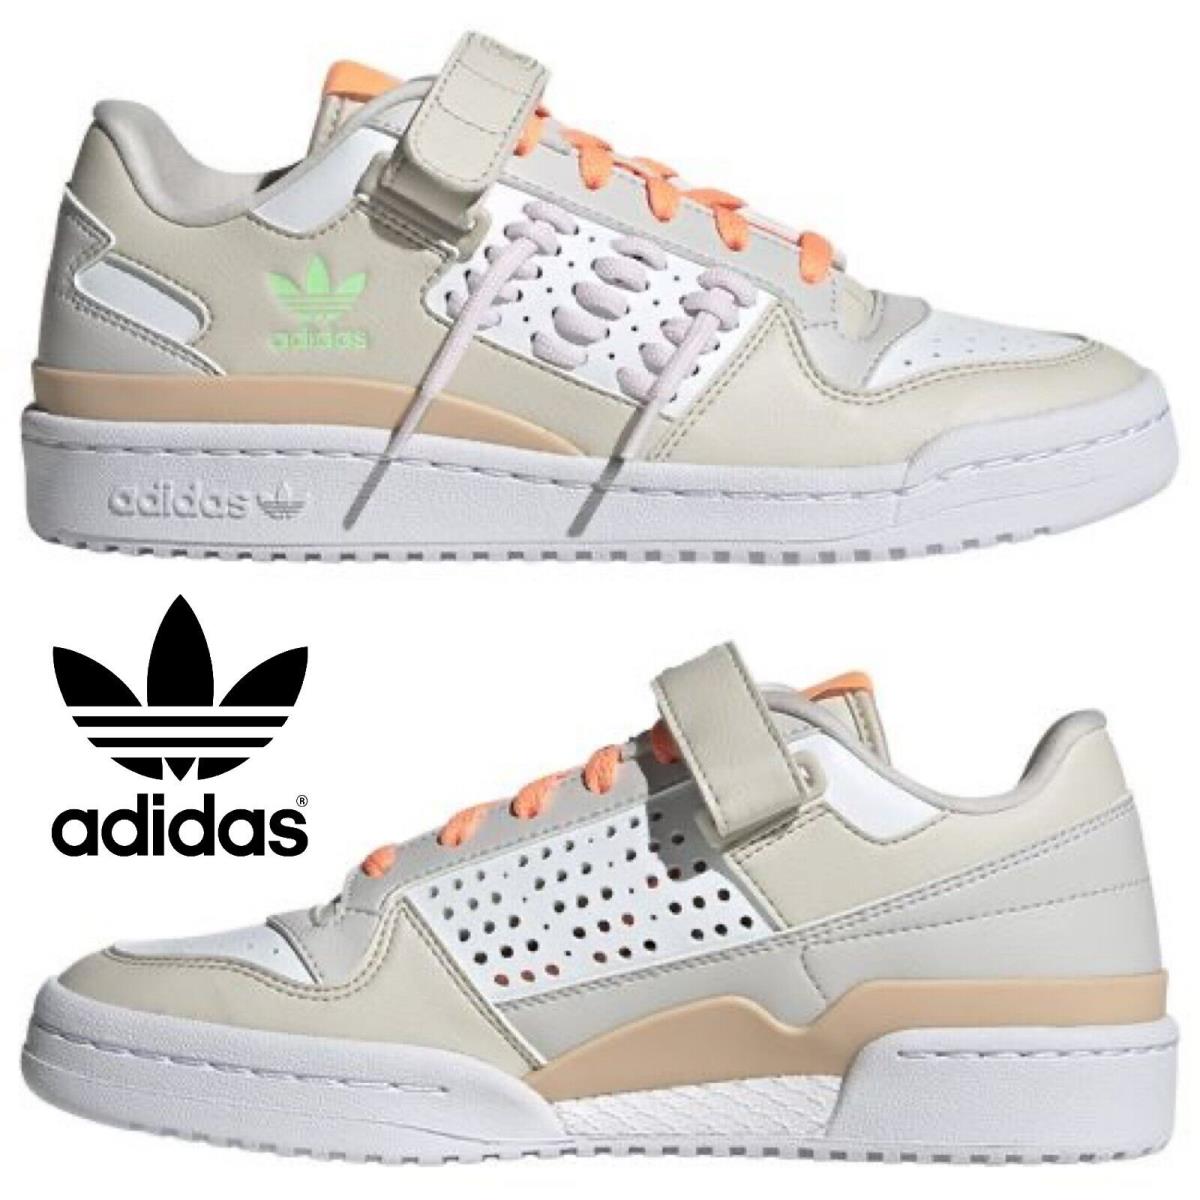 Adidas Originals Forum Low Women`s Sneakers Comfort Casual Shoes White Brown